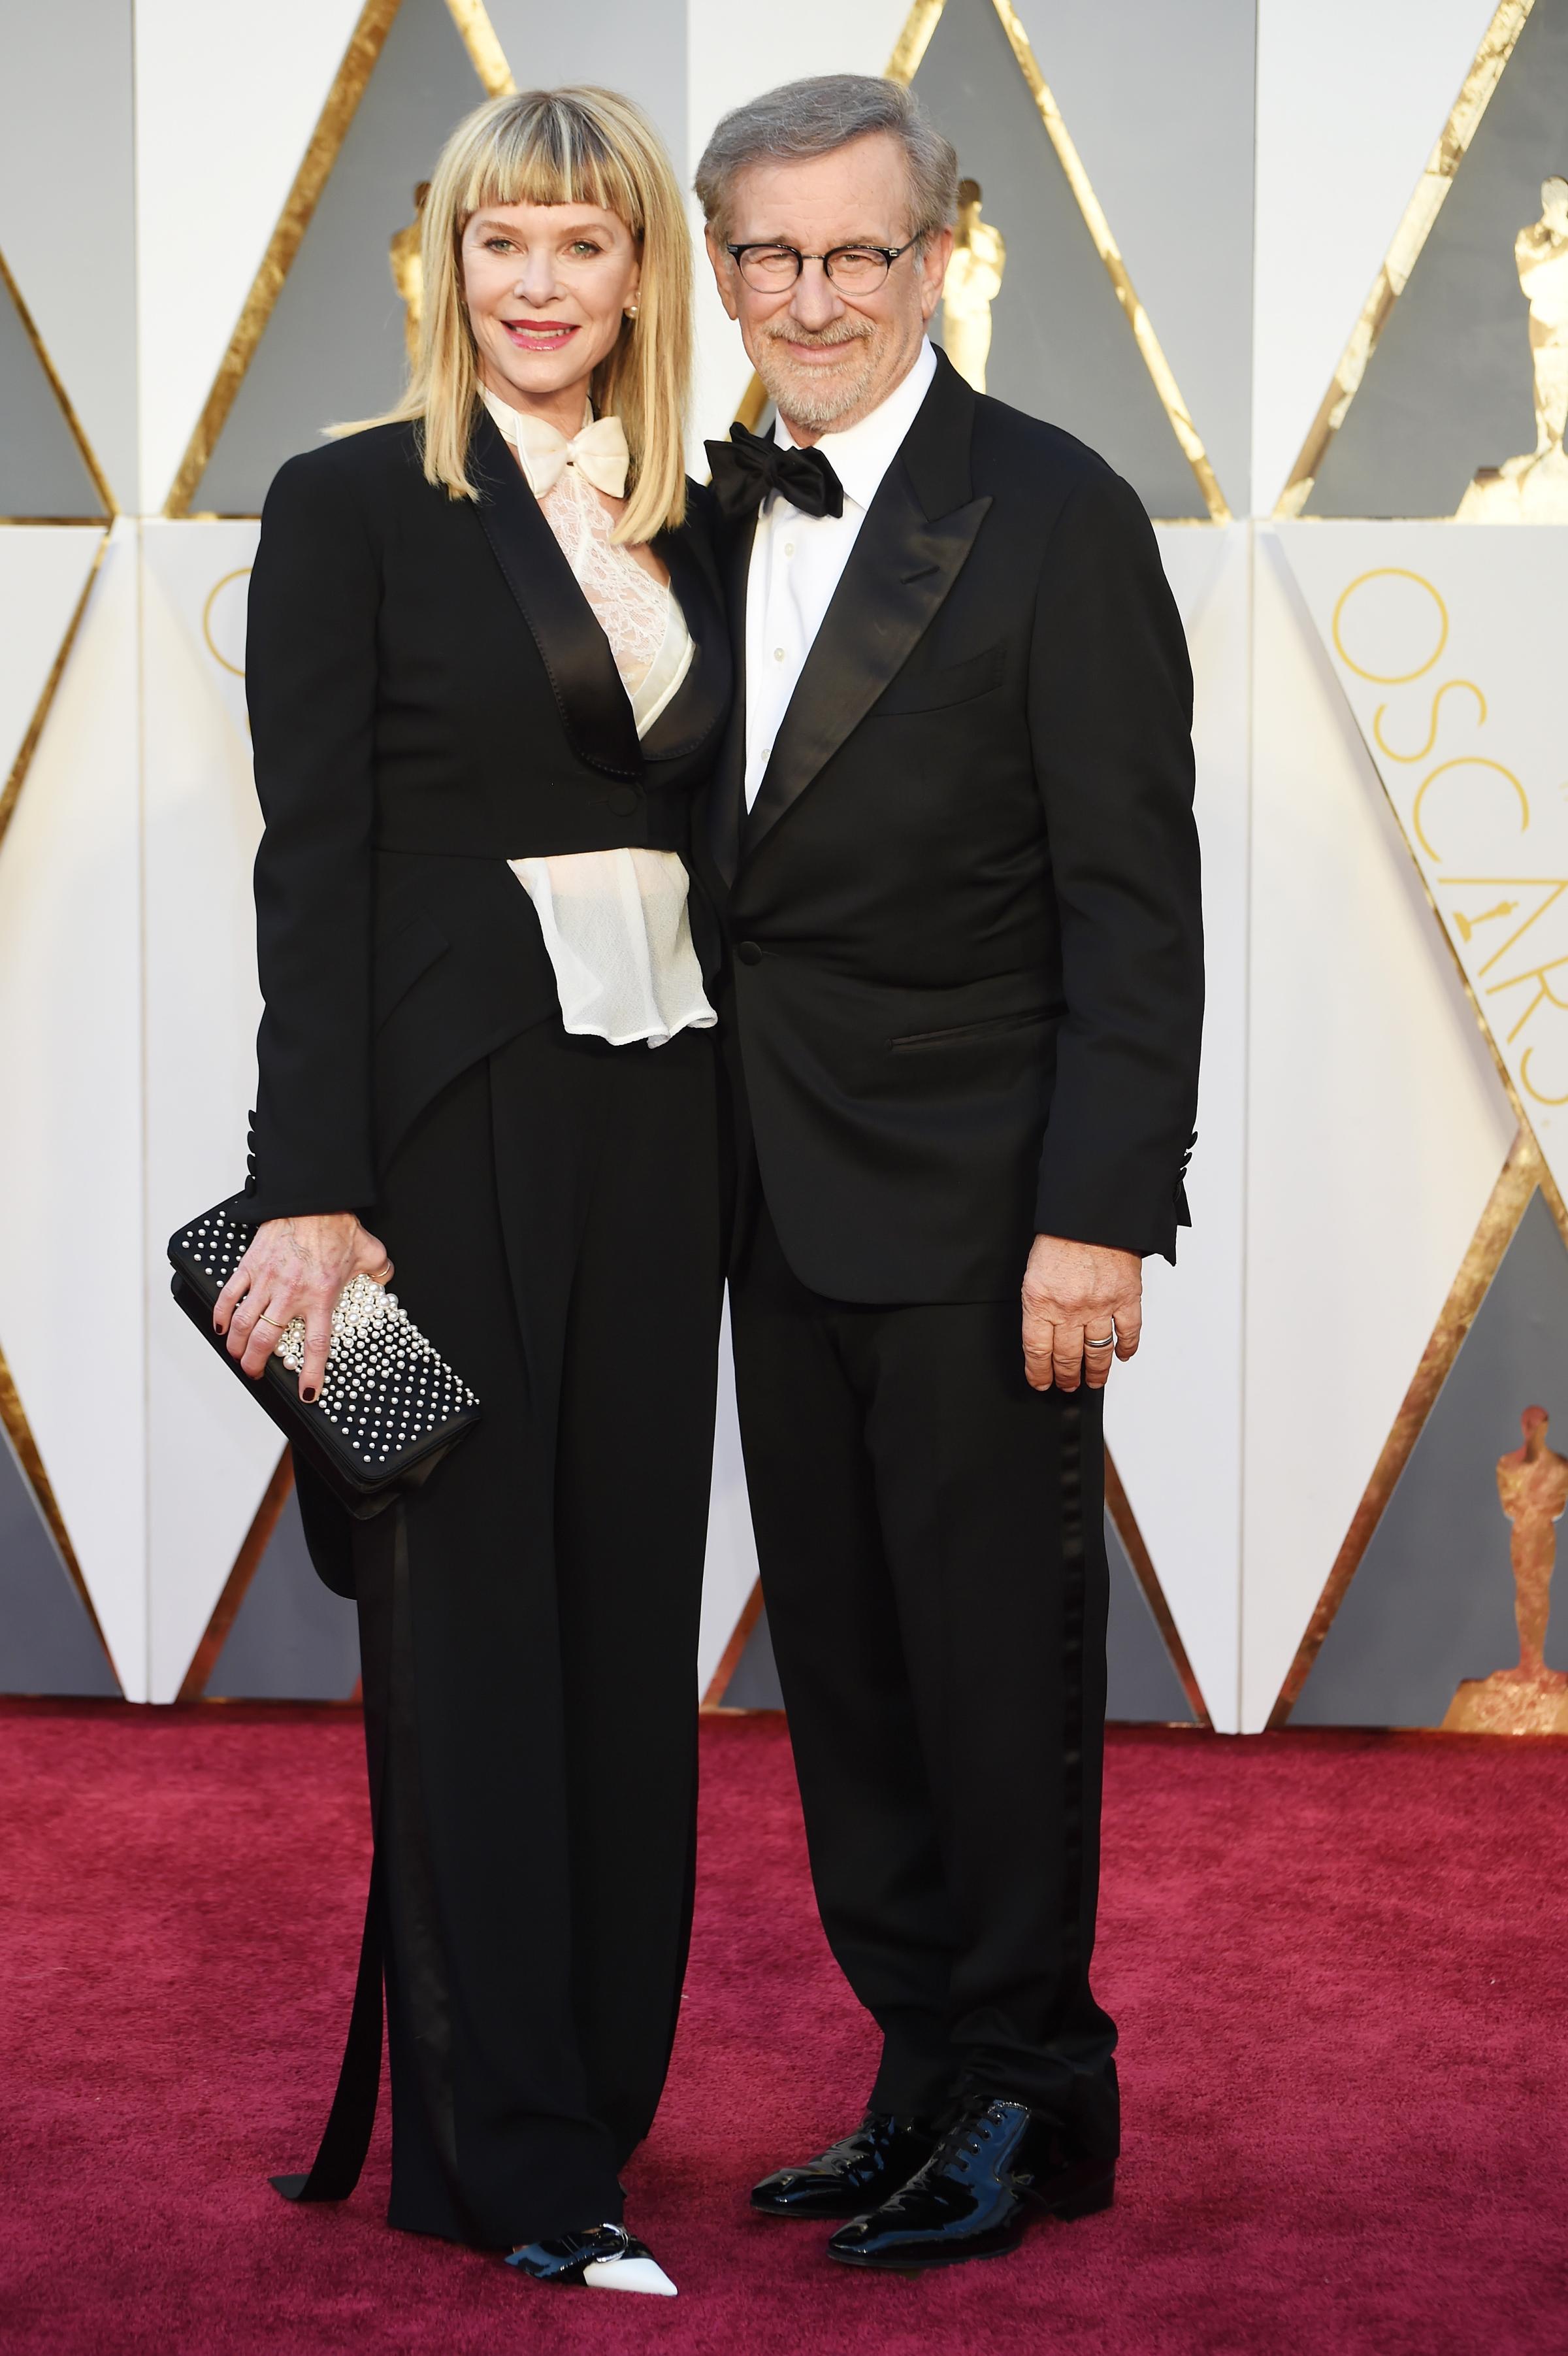 Kate Capshaw and Steven Spielberg attend the 88th Annual Academy Awards on Feb. 28, 2016 in Hollywood, Calif.